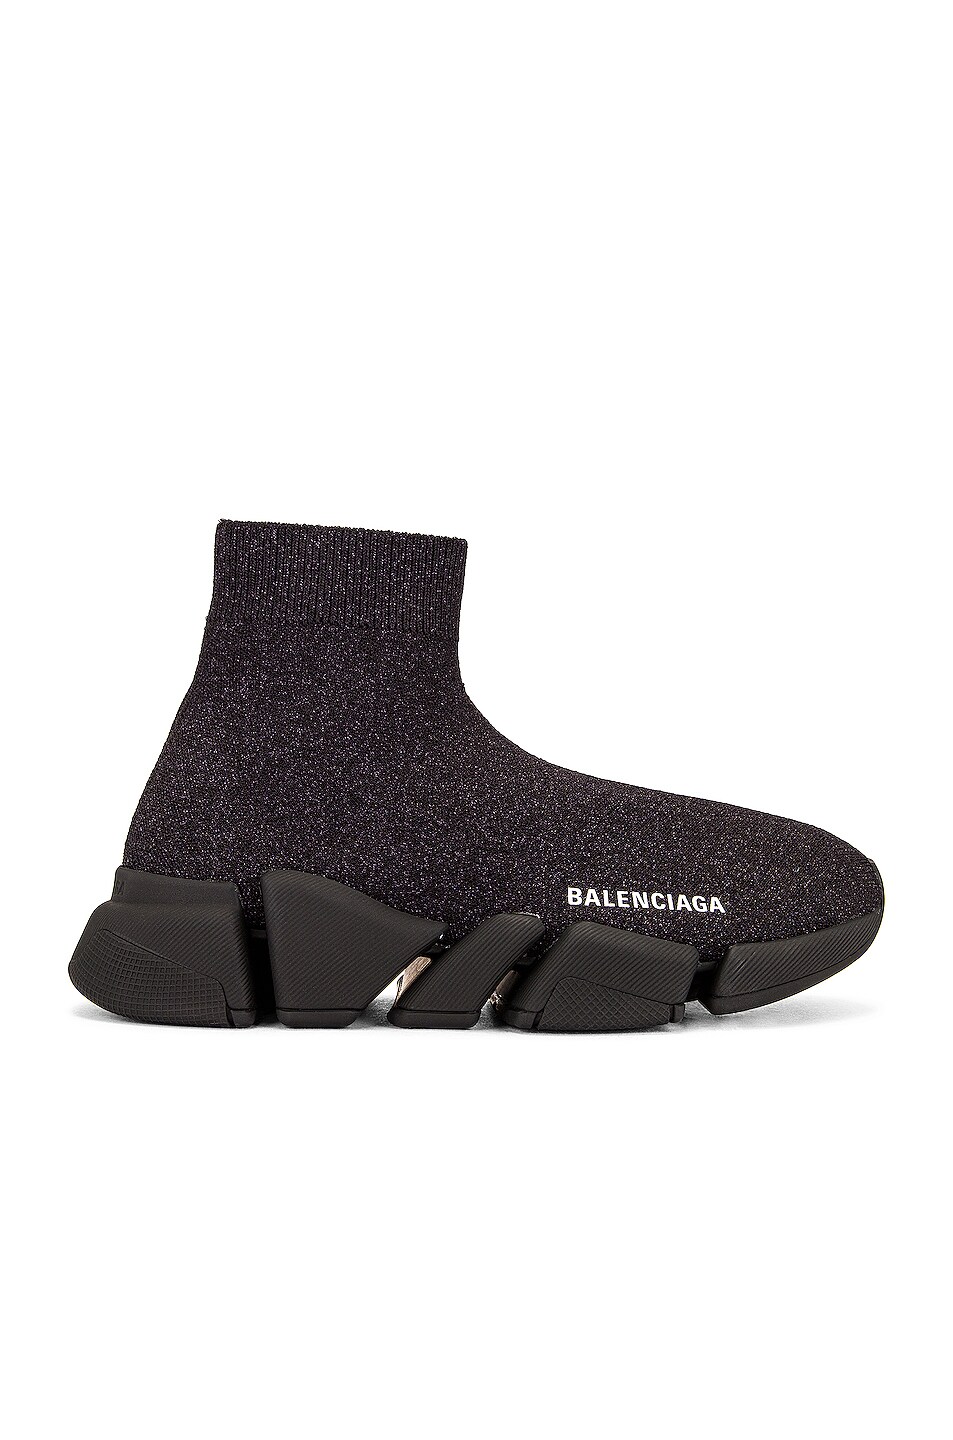 Image 1 of Balenciaga Speed 2.0 LT Sneakers in Black